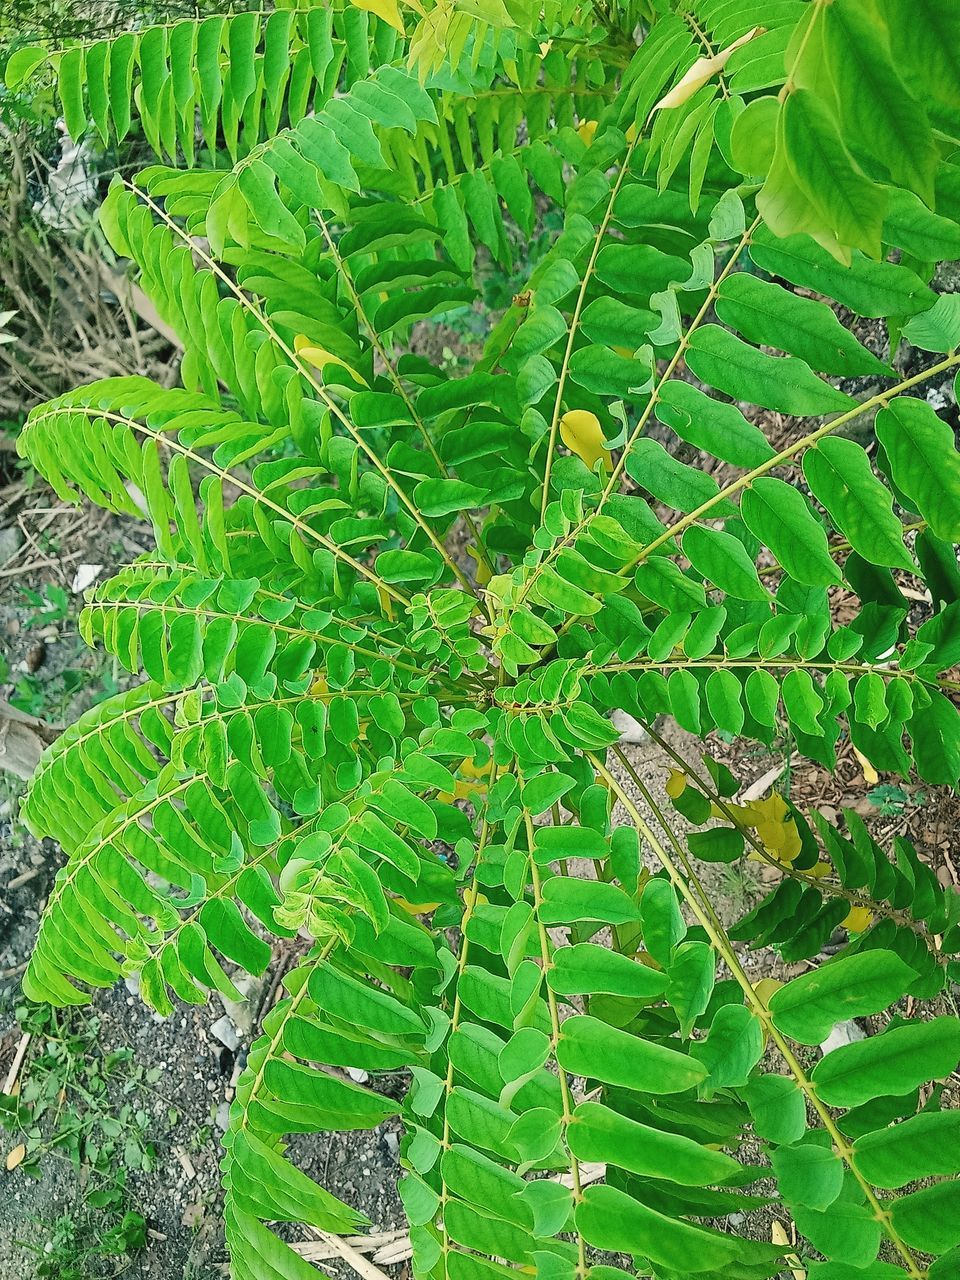 HIGH ANGLE VIEW OF FERN LEAVES ON TREE